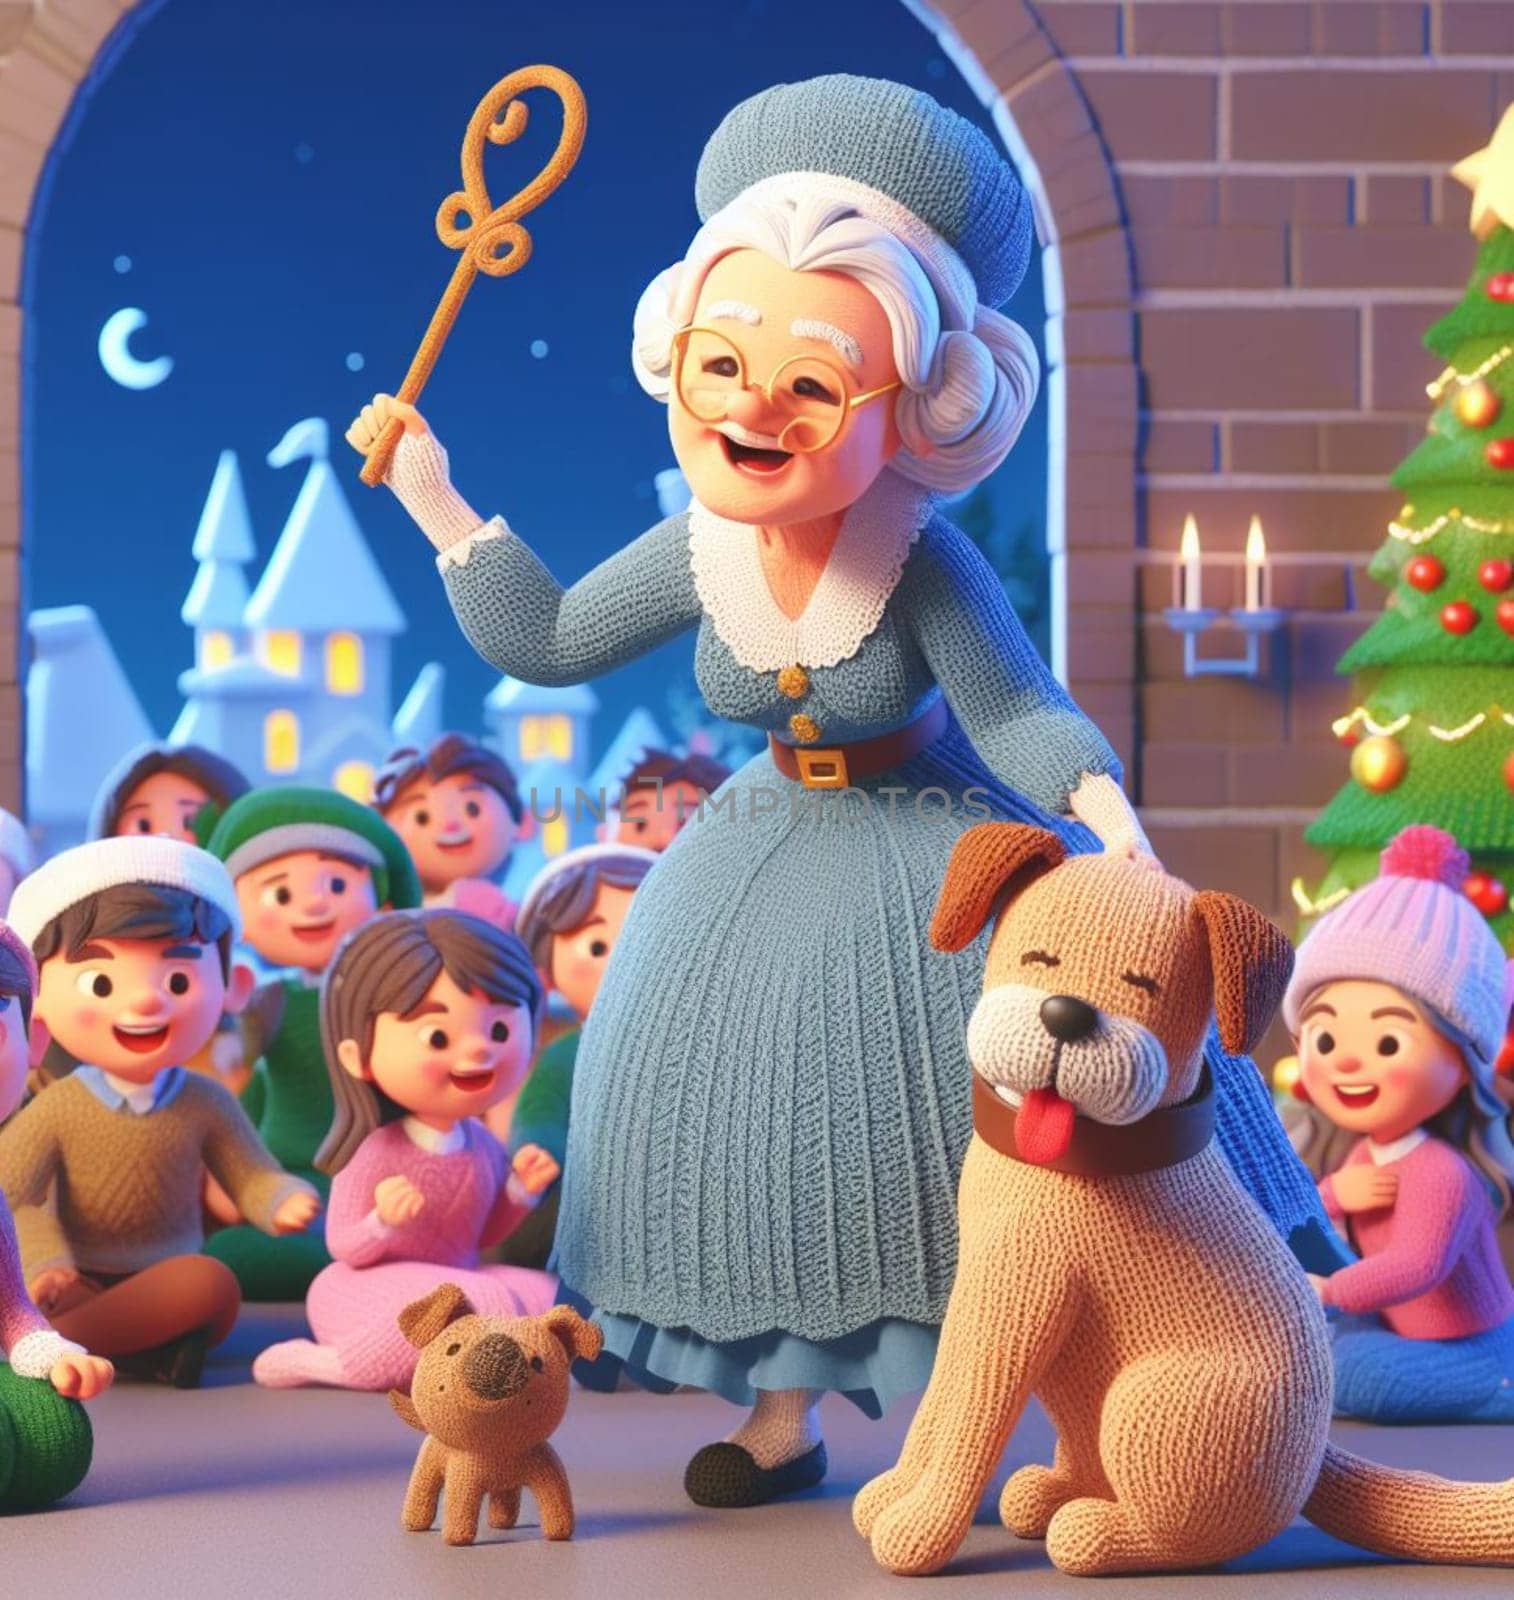 granny wear santa claus costume telling christmas fairy tales to children near a castle by verbano